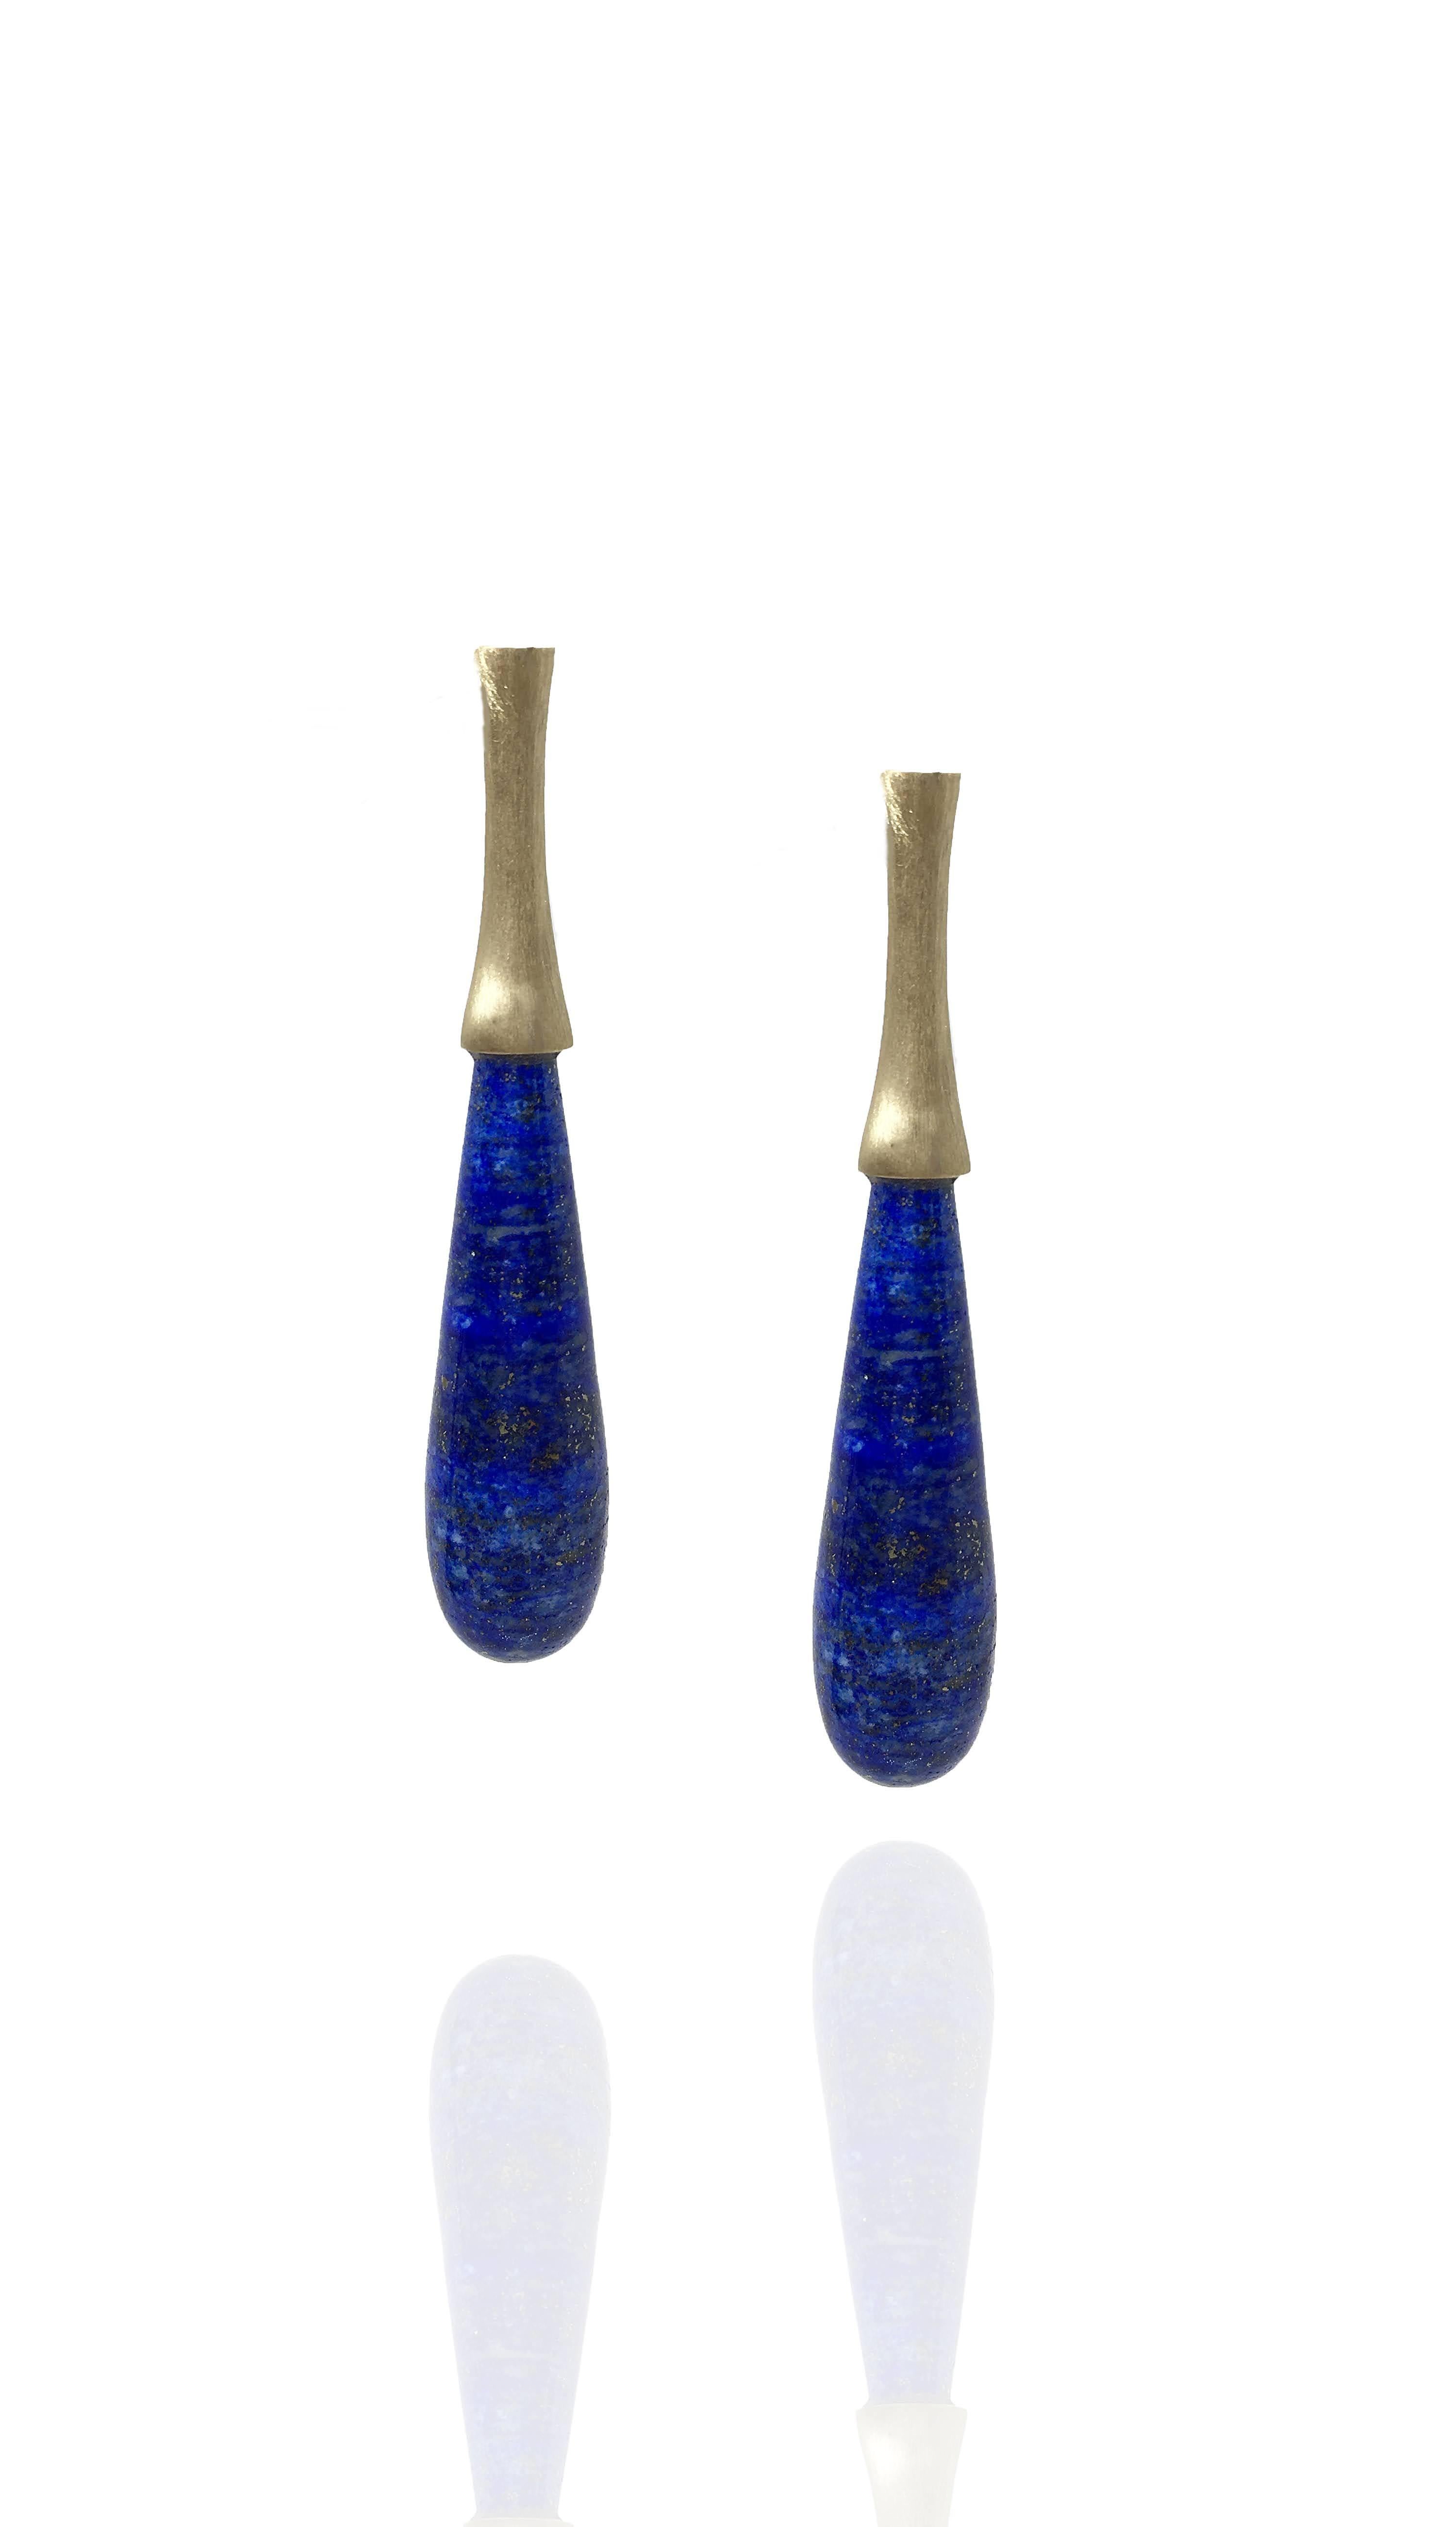 These one of a kind lapis lazuli drops are long and elegant with gorgeous flecks of white calcite and pyrite crystals. 